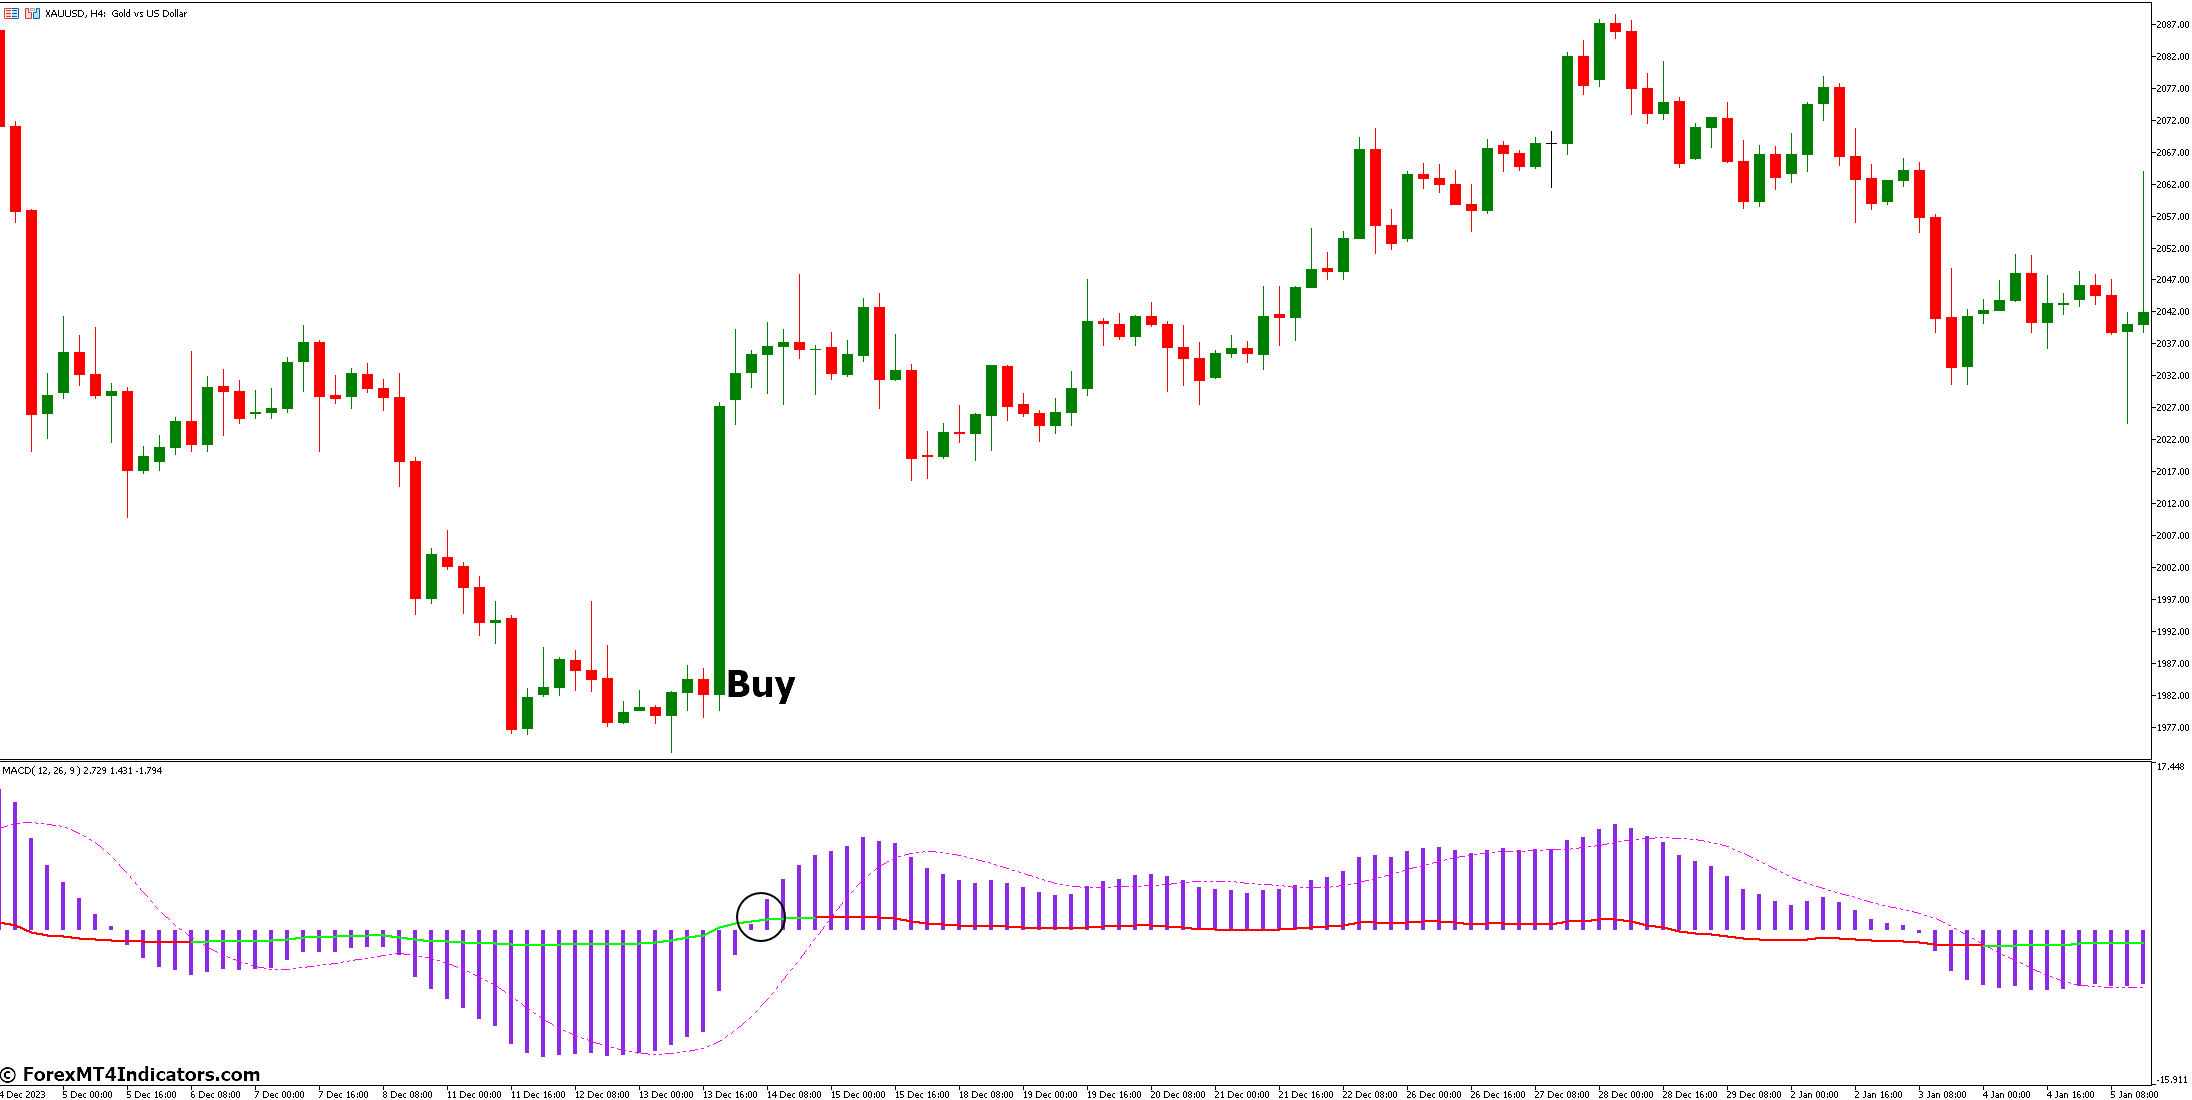 How to Trade with MACD RSI Indicator - Buy Entry